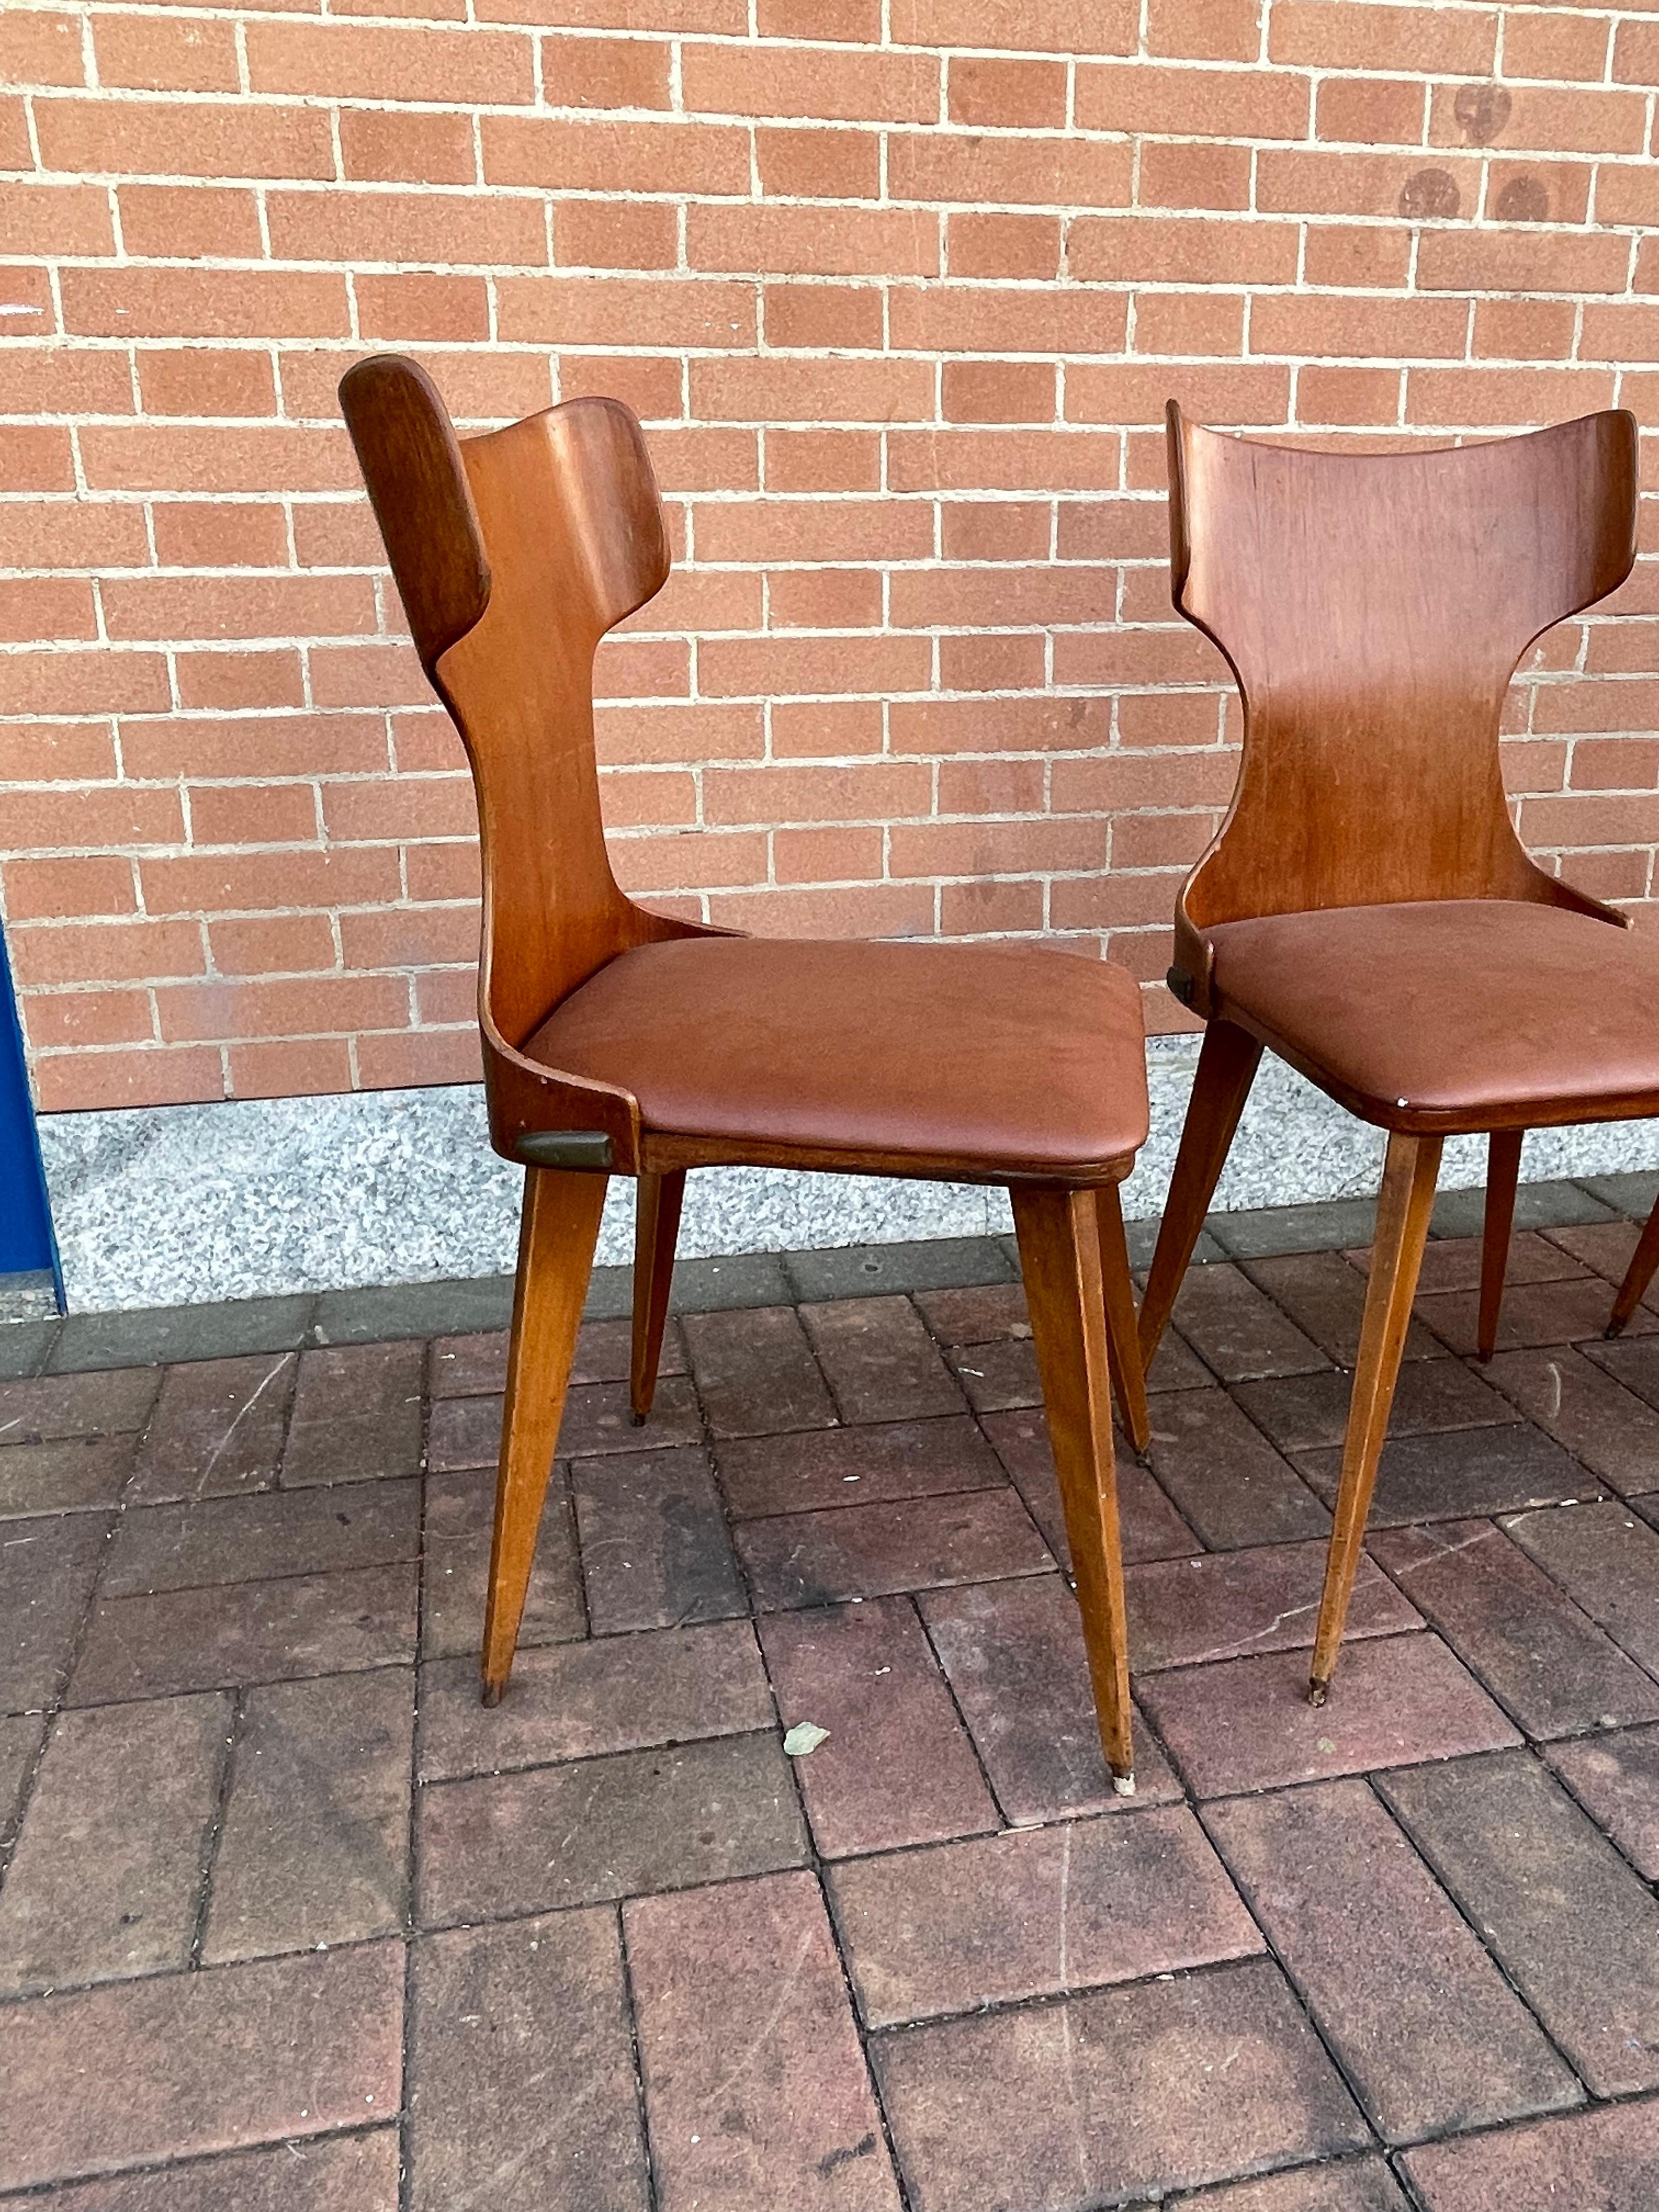 Mid-20th Century Set of 4 curved chairs by Carlo Ratti, 50s, Italy